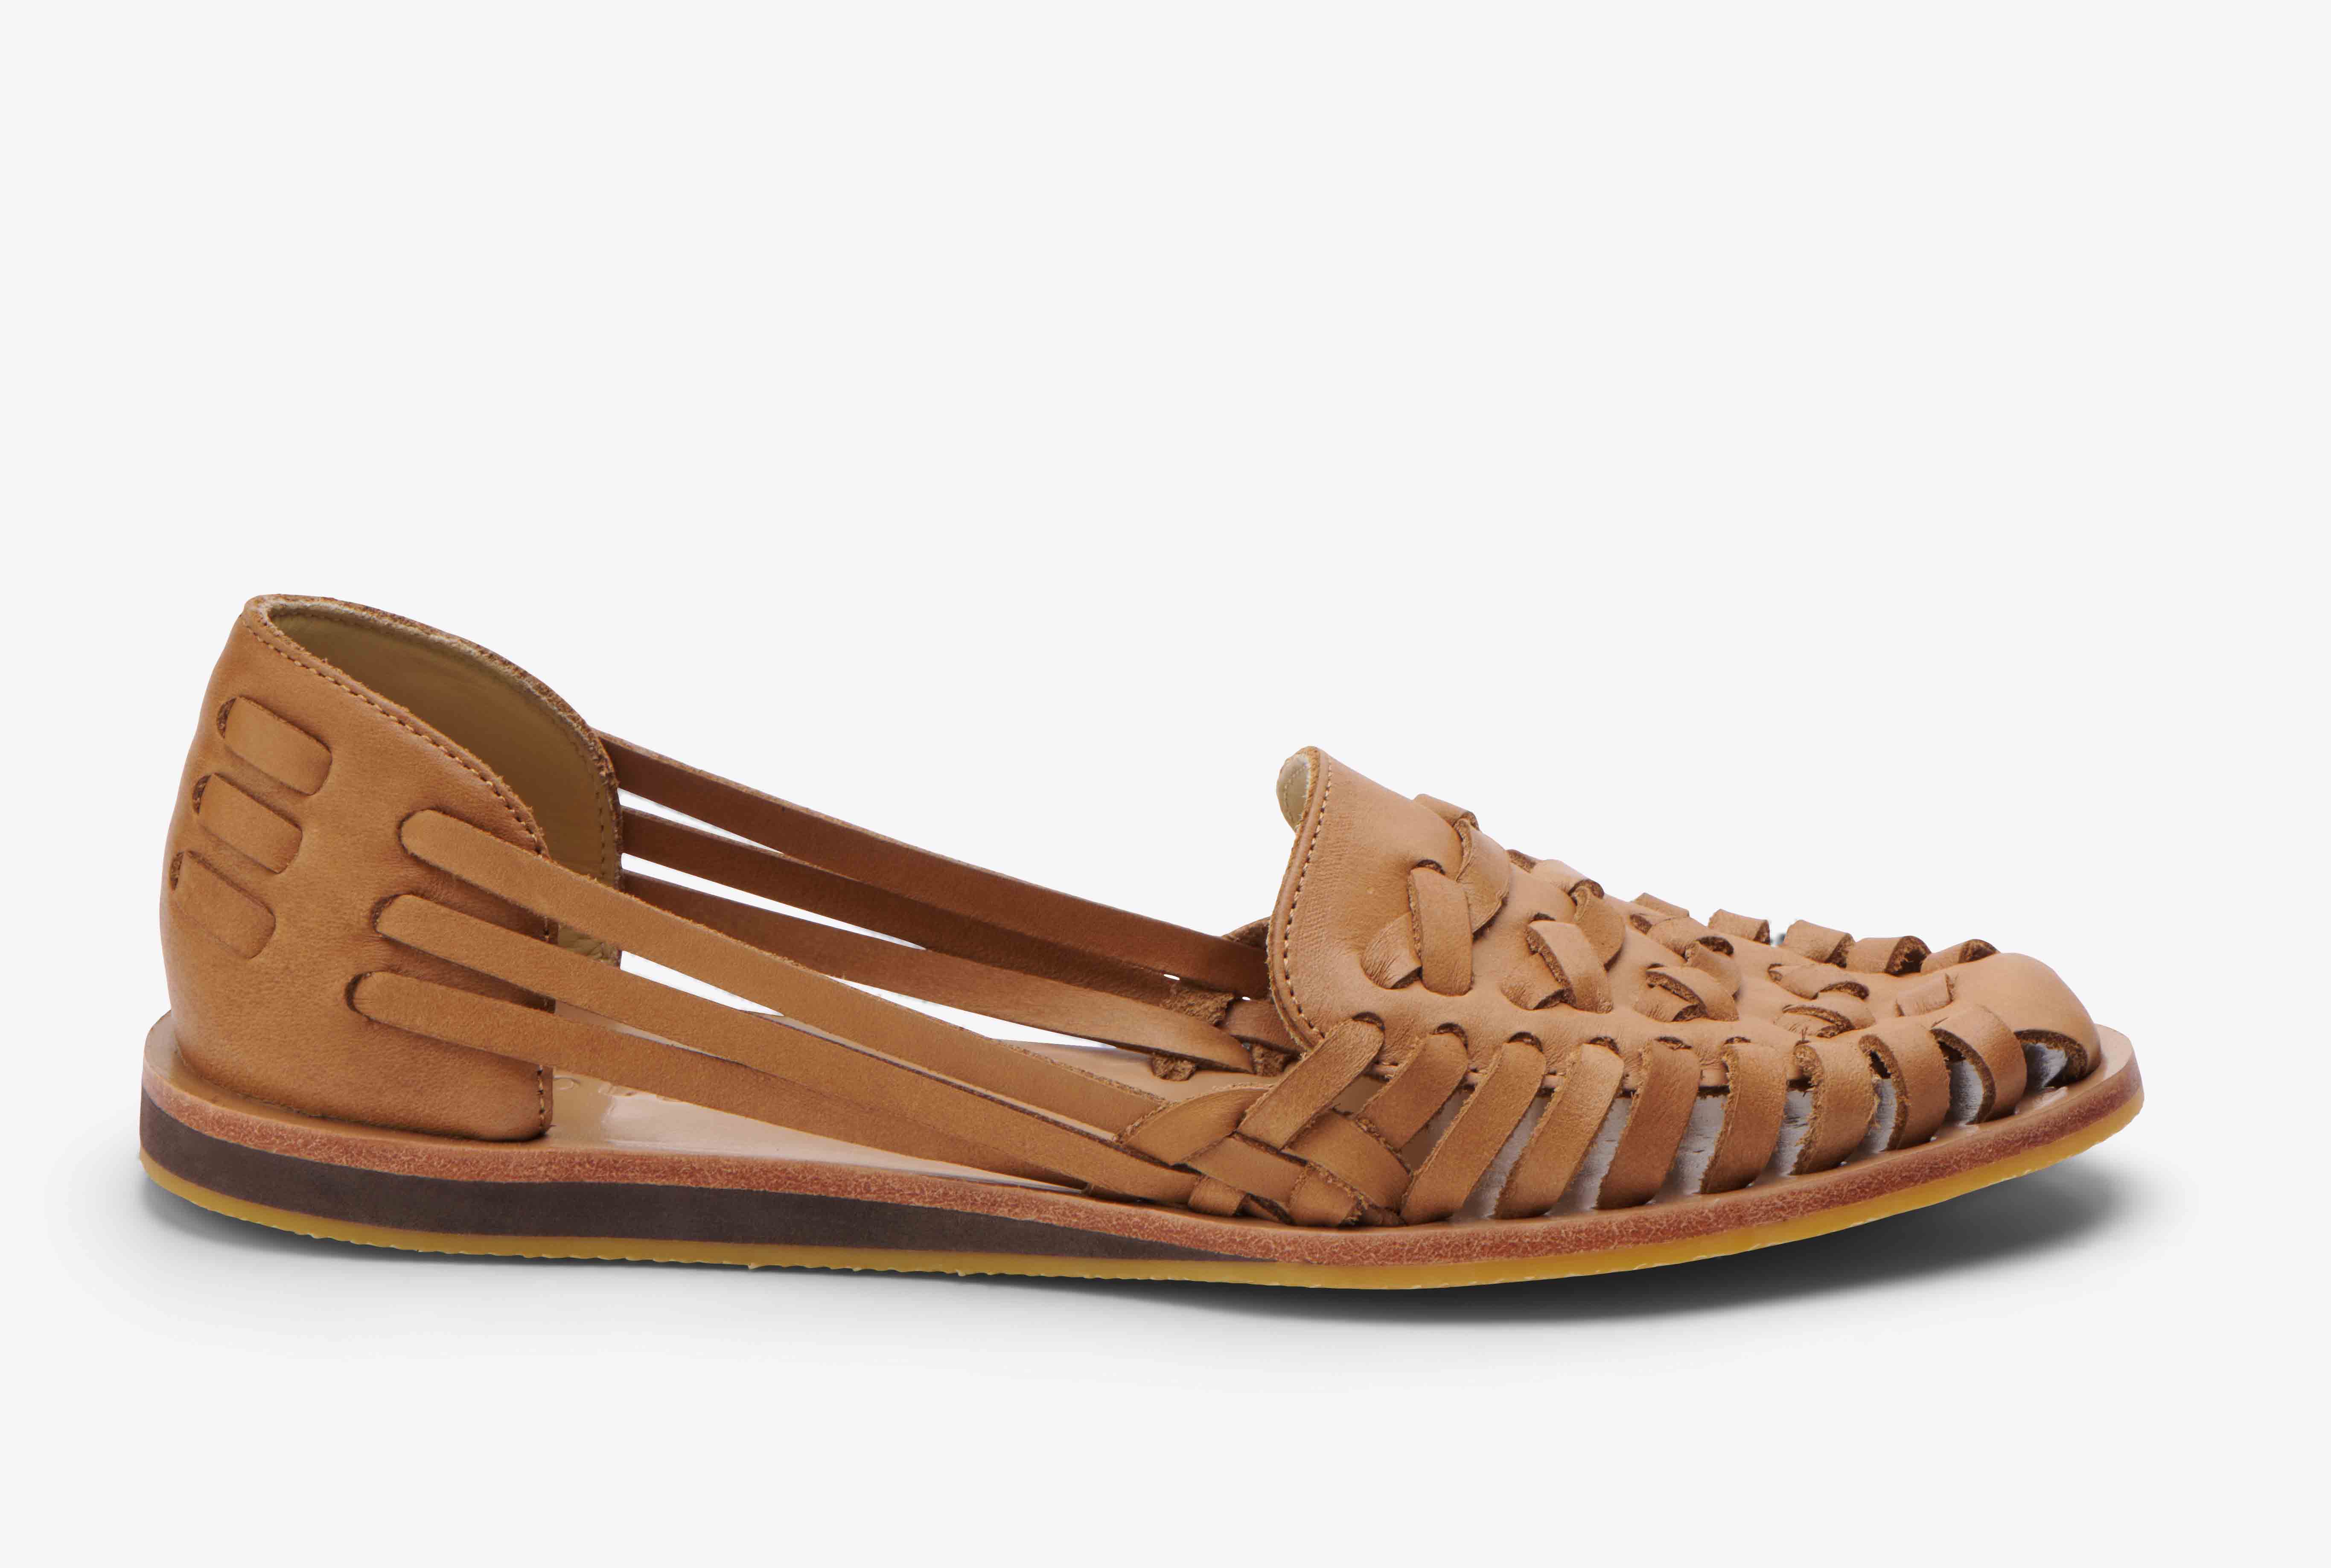 Nisolo Women's Huarache Sandal Almond - Every Nisolo product is built on the foundation of comfort, function, and design. 